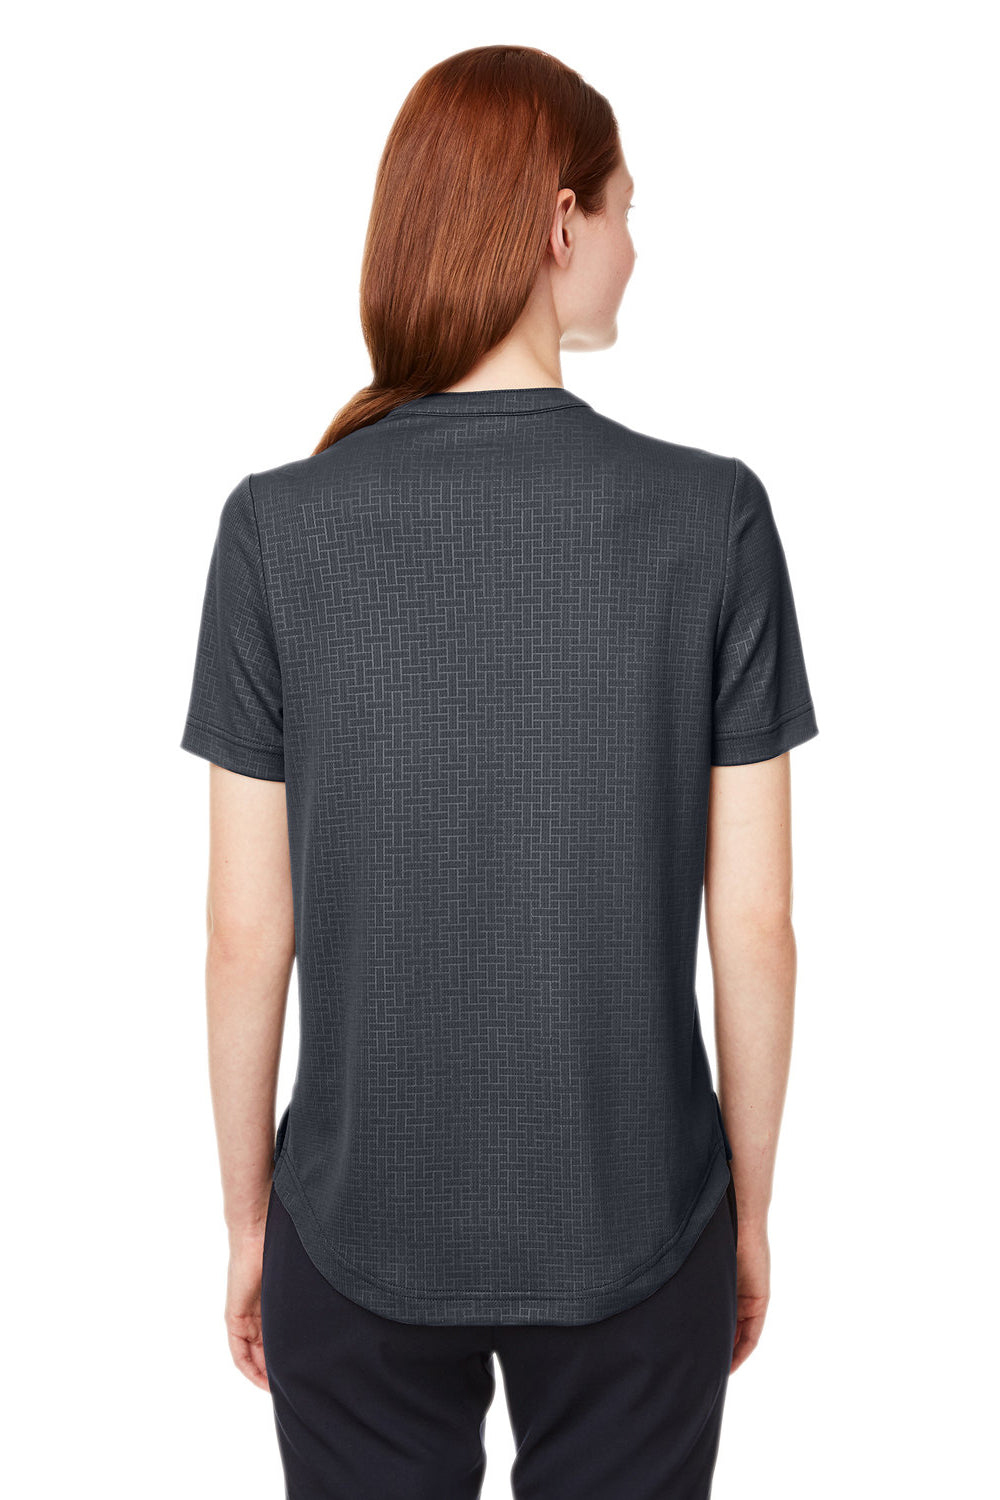 North End NE102W Womens Replay Recycled Short Sleeve Polo Shirt Carbon Grey Back